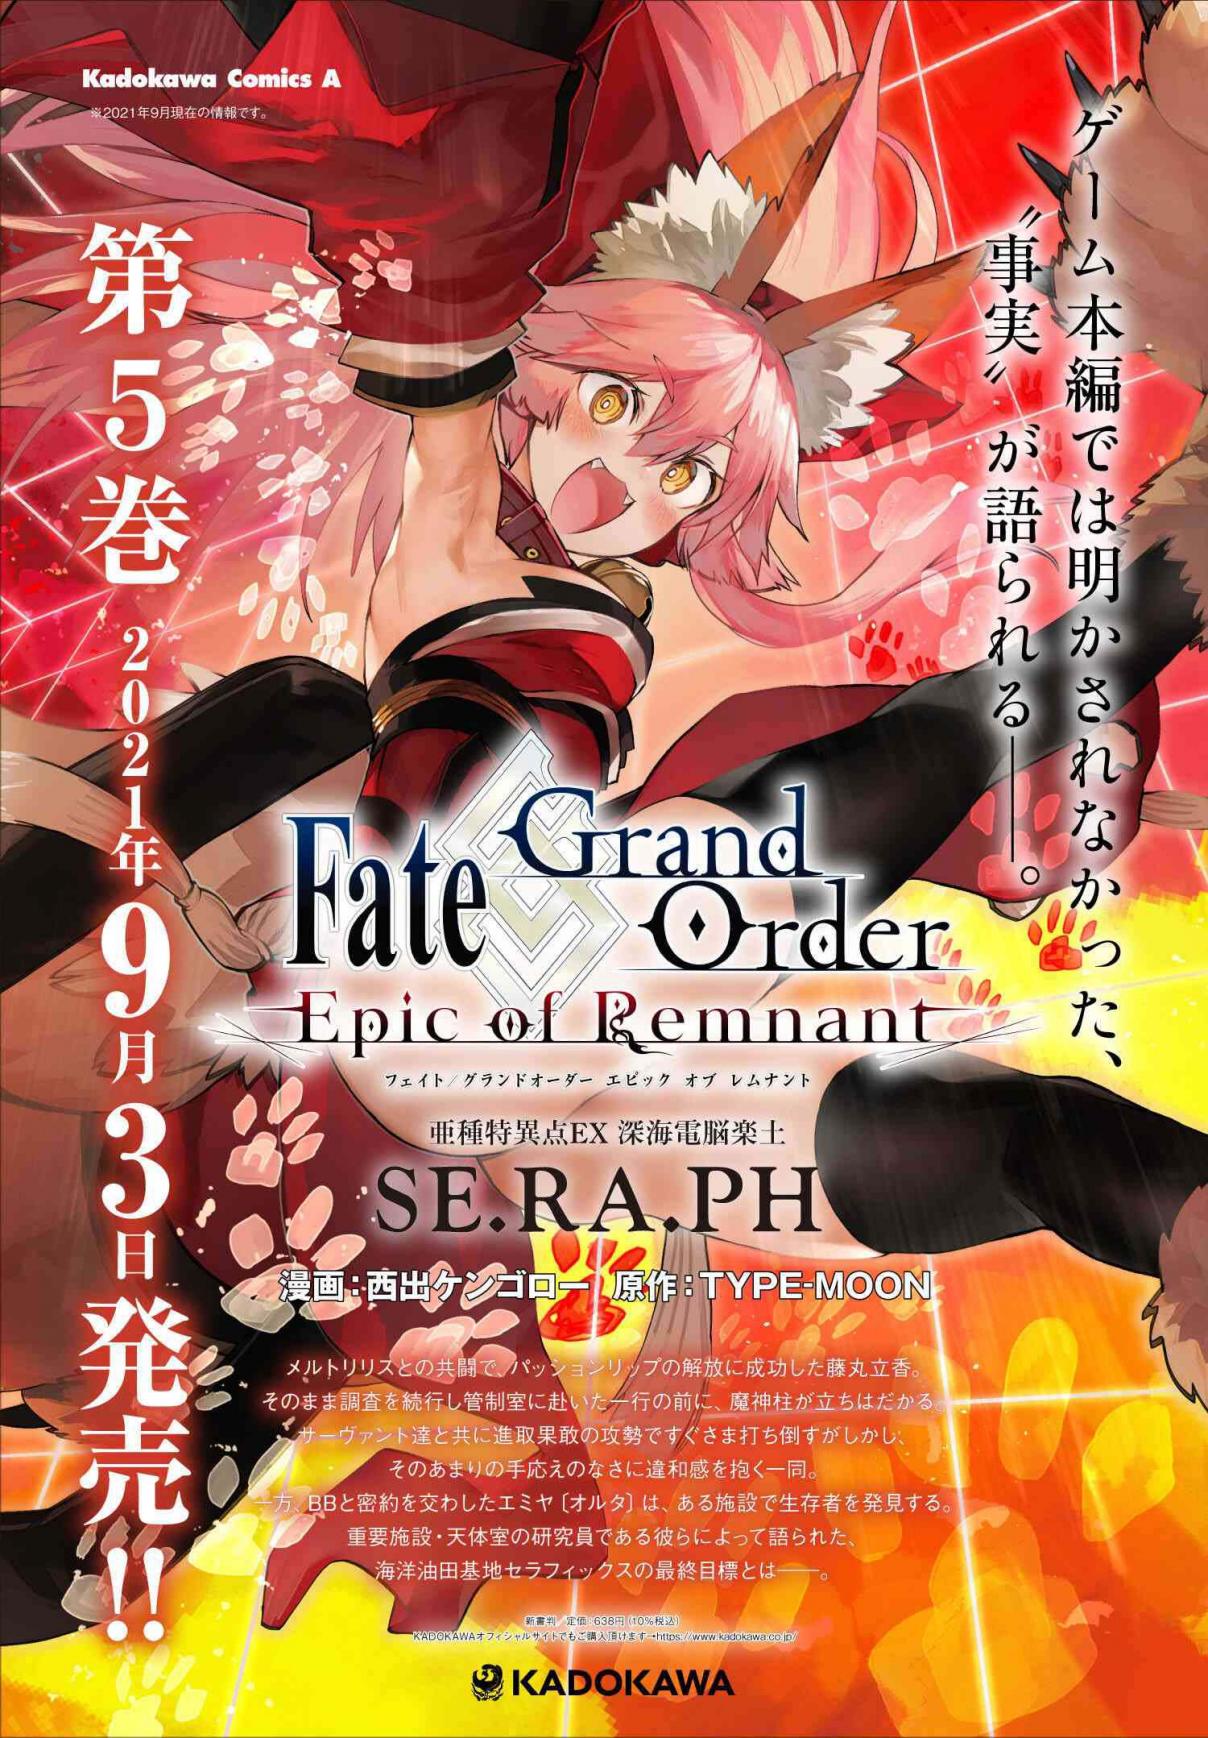 Fate/Grand Order: Epic of Remnant - Deep Sea Cyber-Paradise SE.RA.PH 24.1